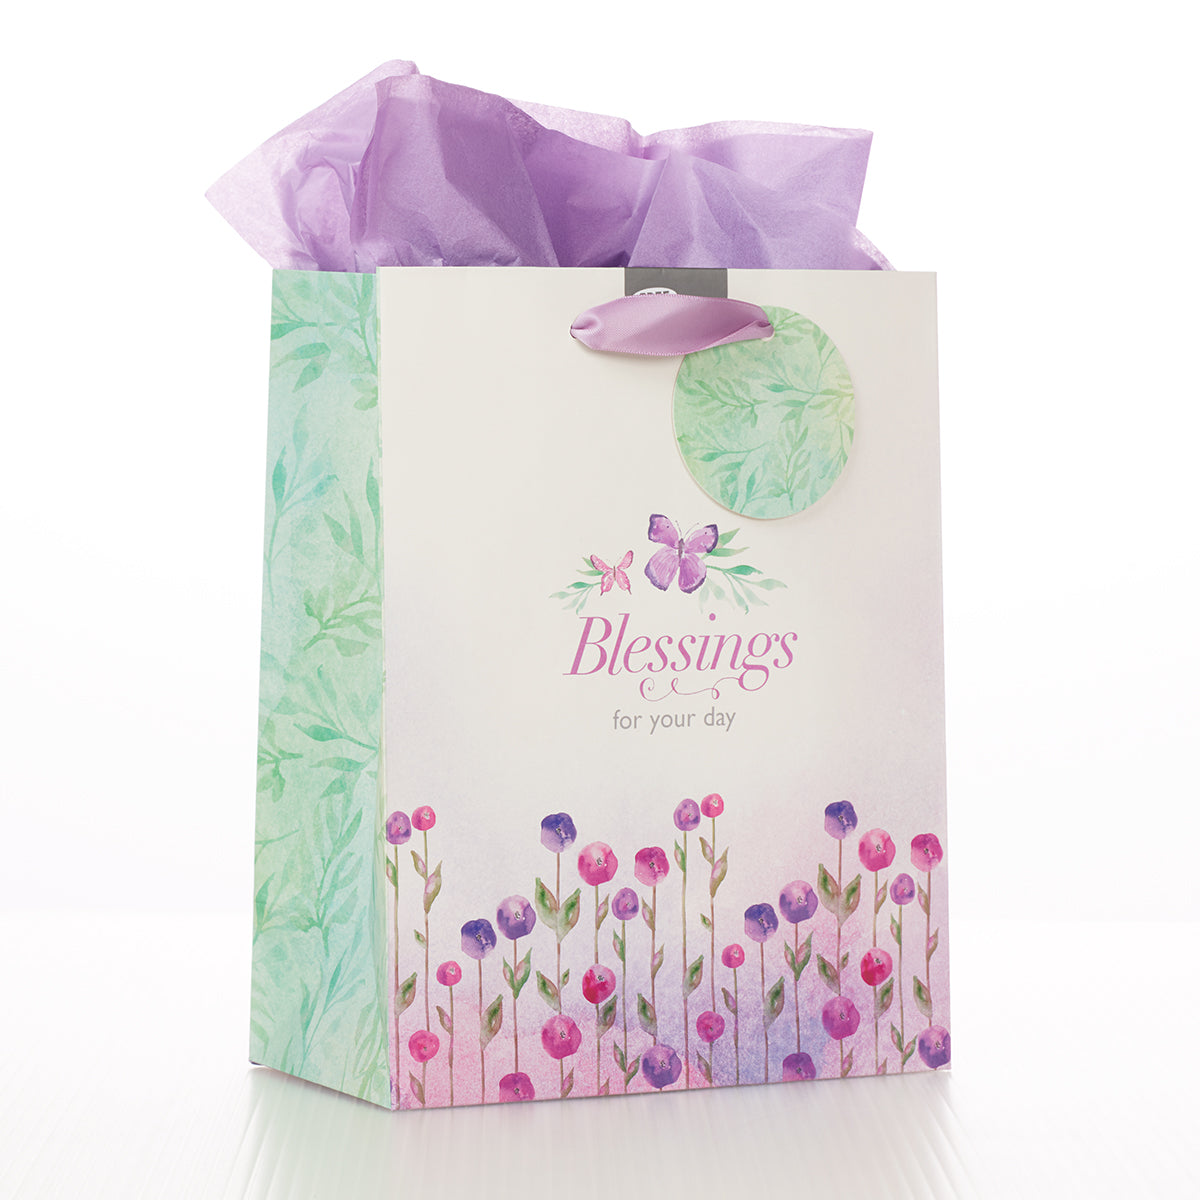 Image of Blessings for Your Day - Deut 16:15 Medium Gift Bag other